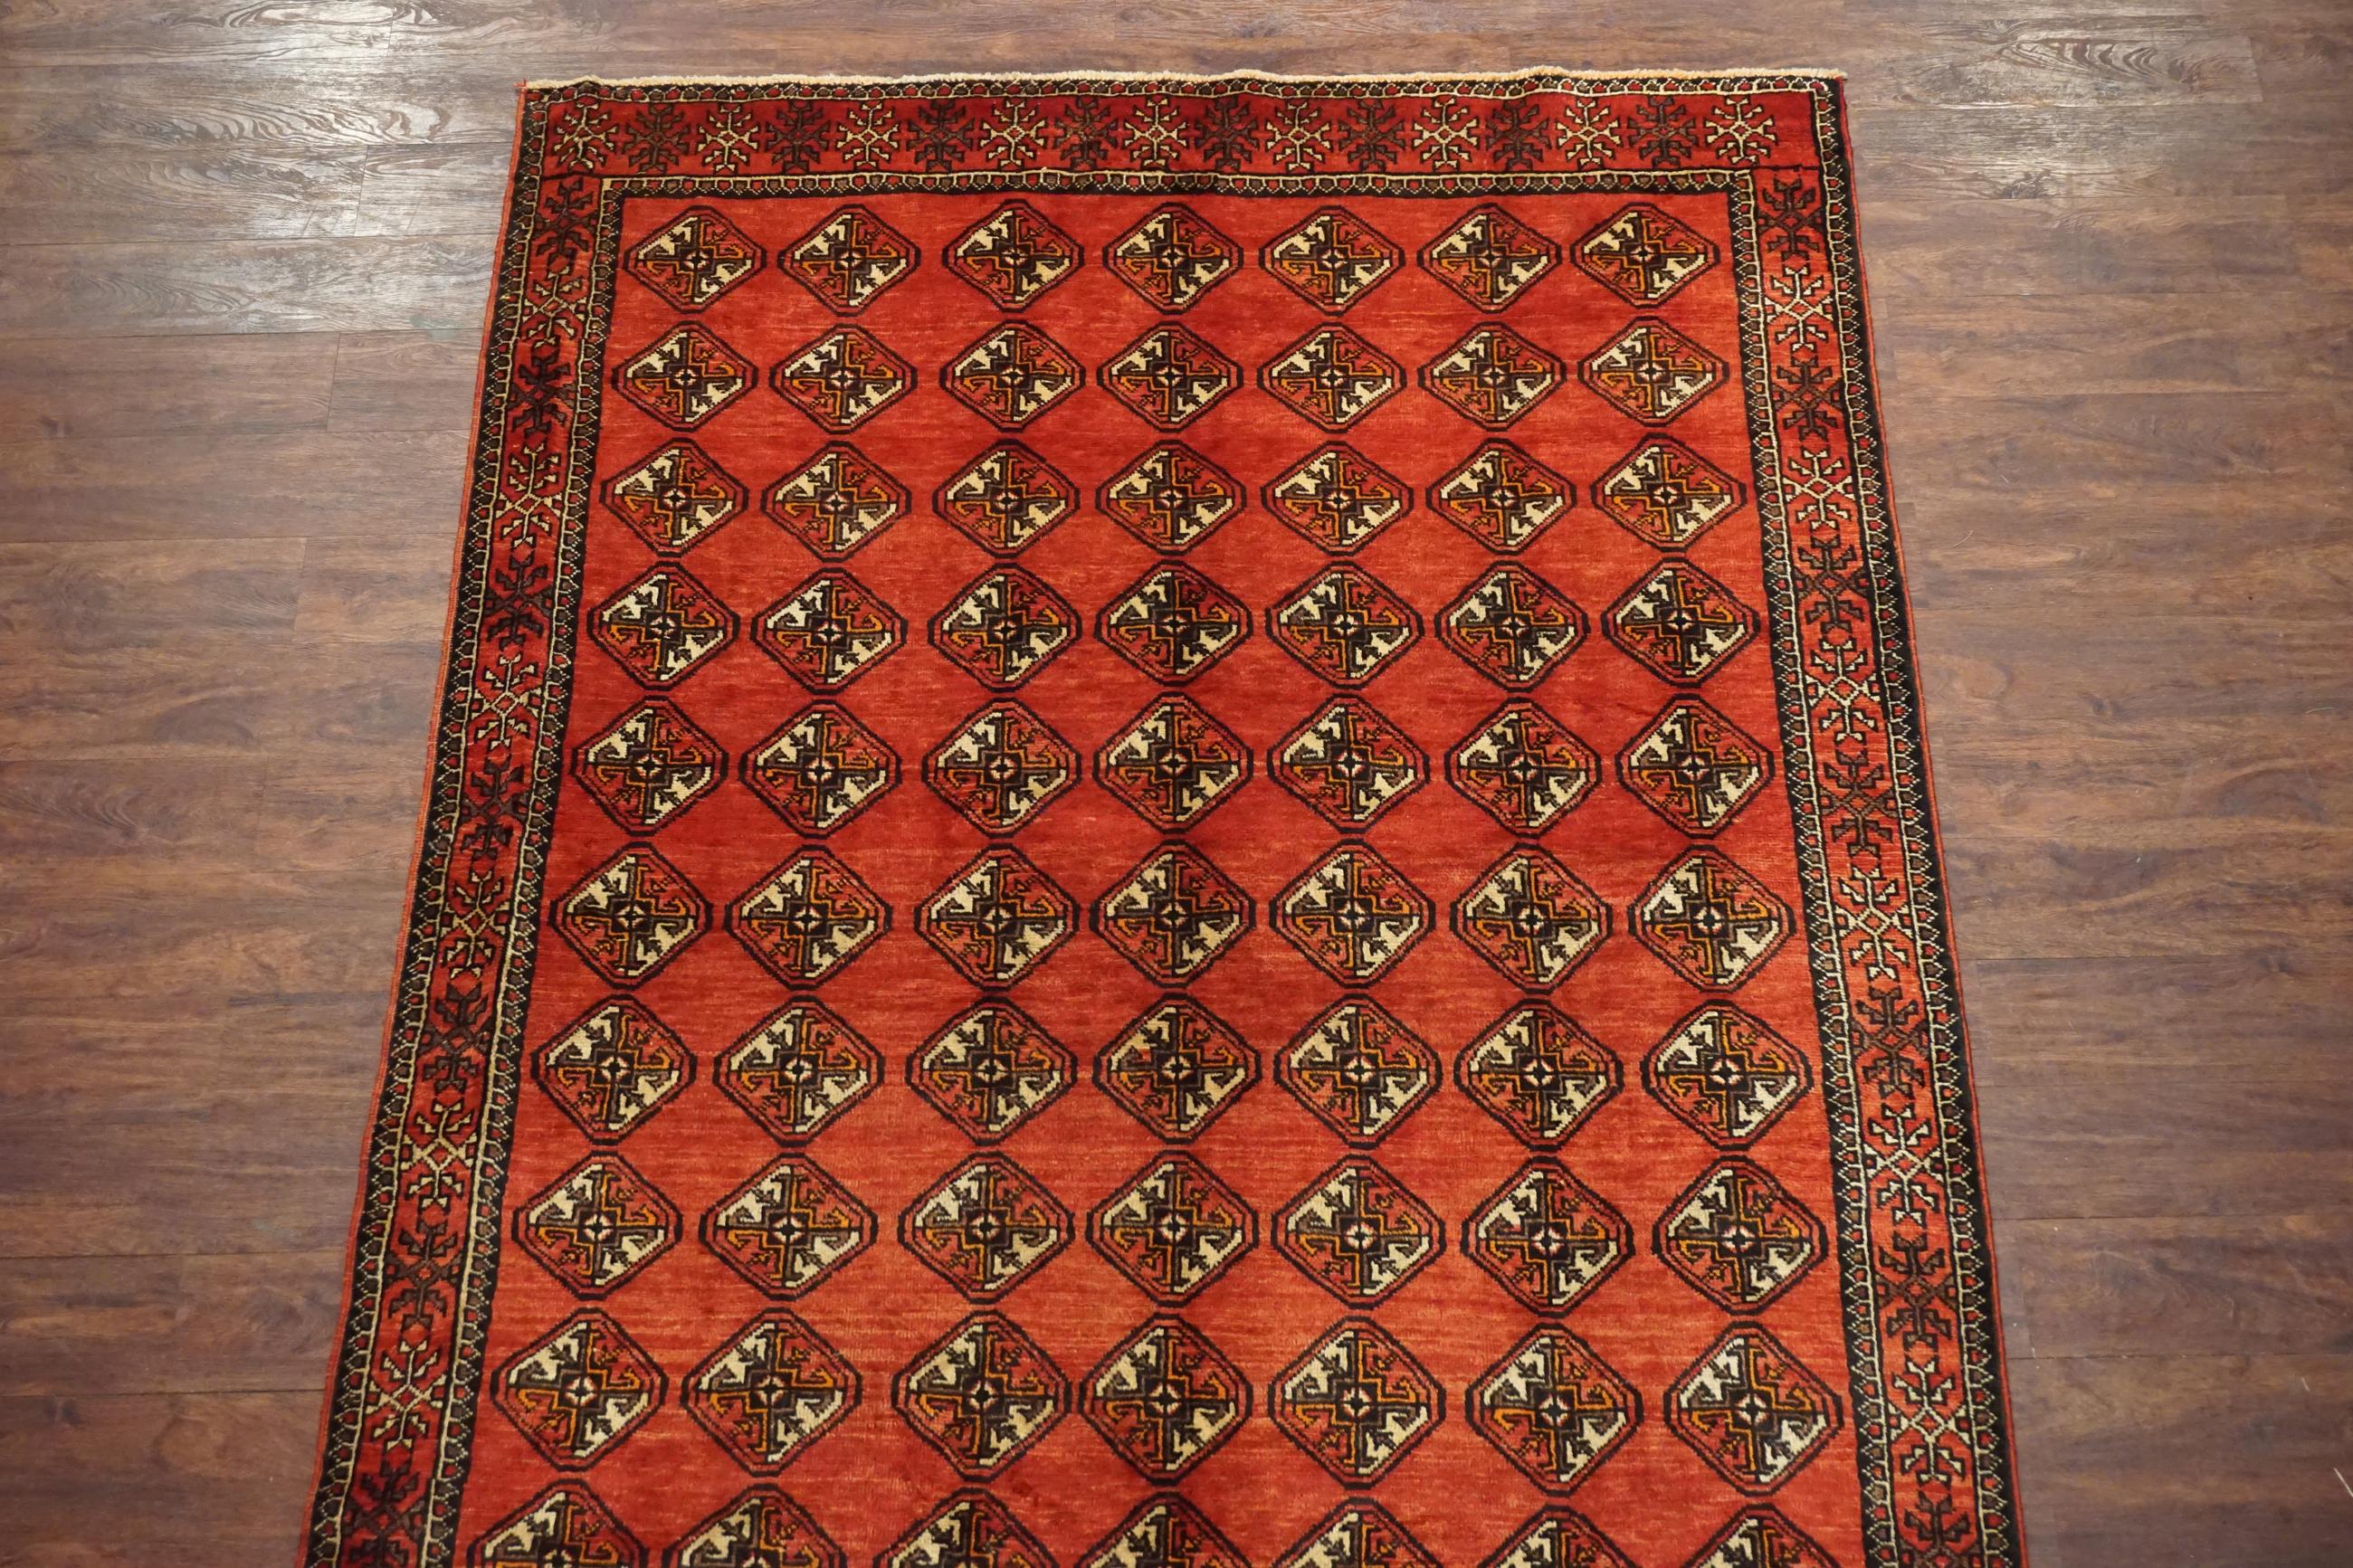 Tribal Bukhara Gallery Runner, circa 1940 In Excellent Condition For Sale In Laguna Hills, CA